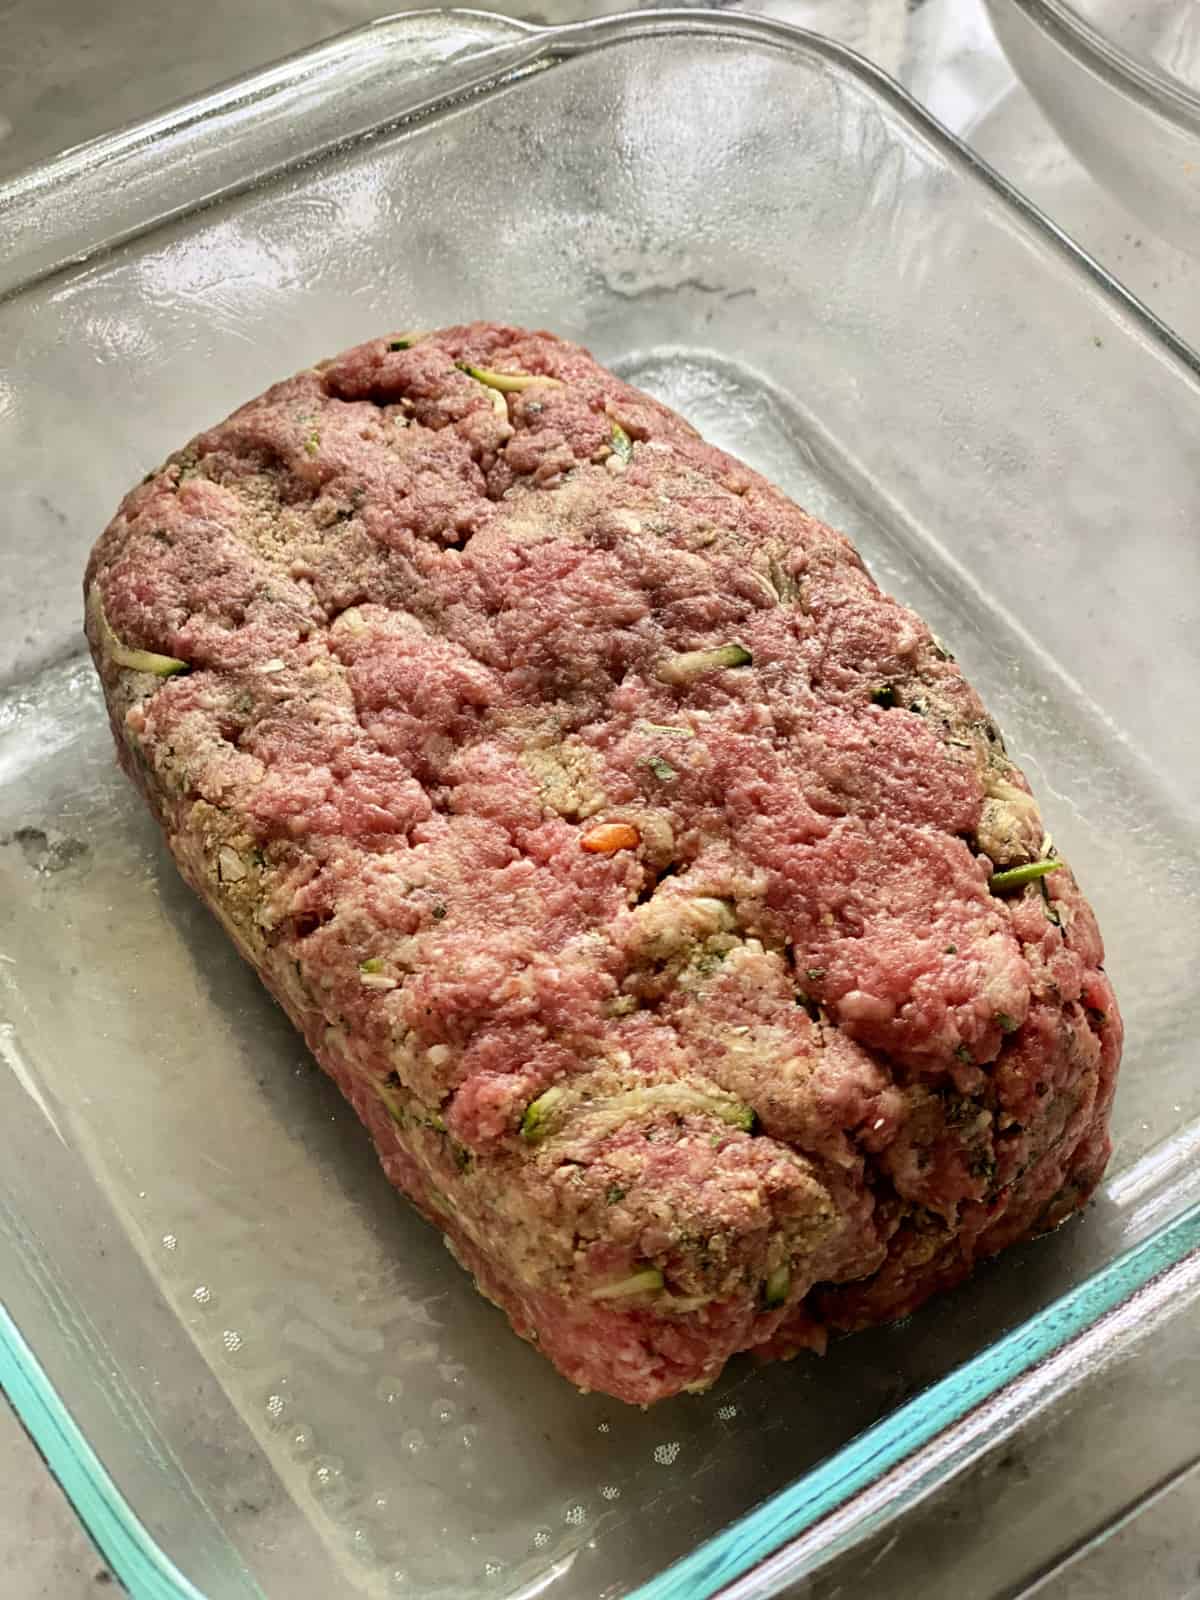 Ground beef shaped into a loaf sitting in a greased glass pan on a marble counter.